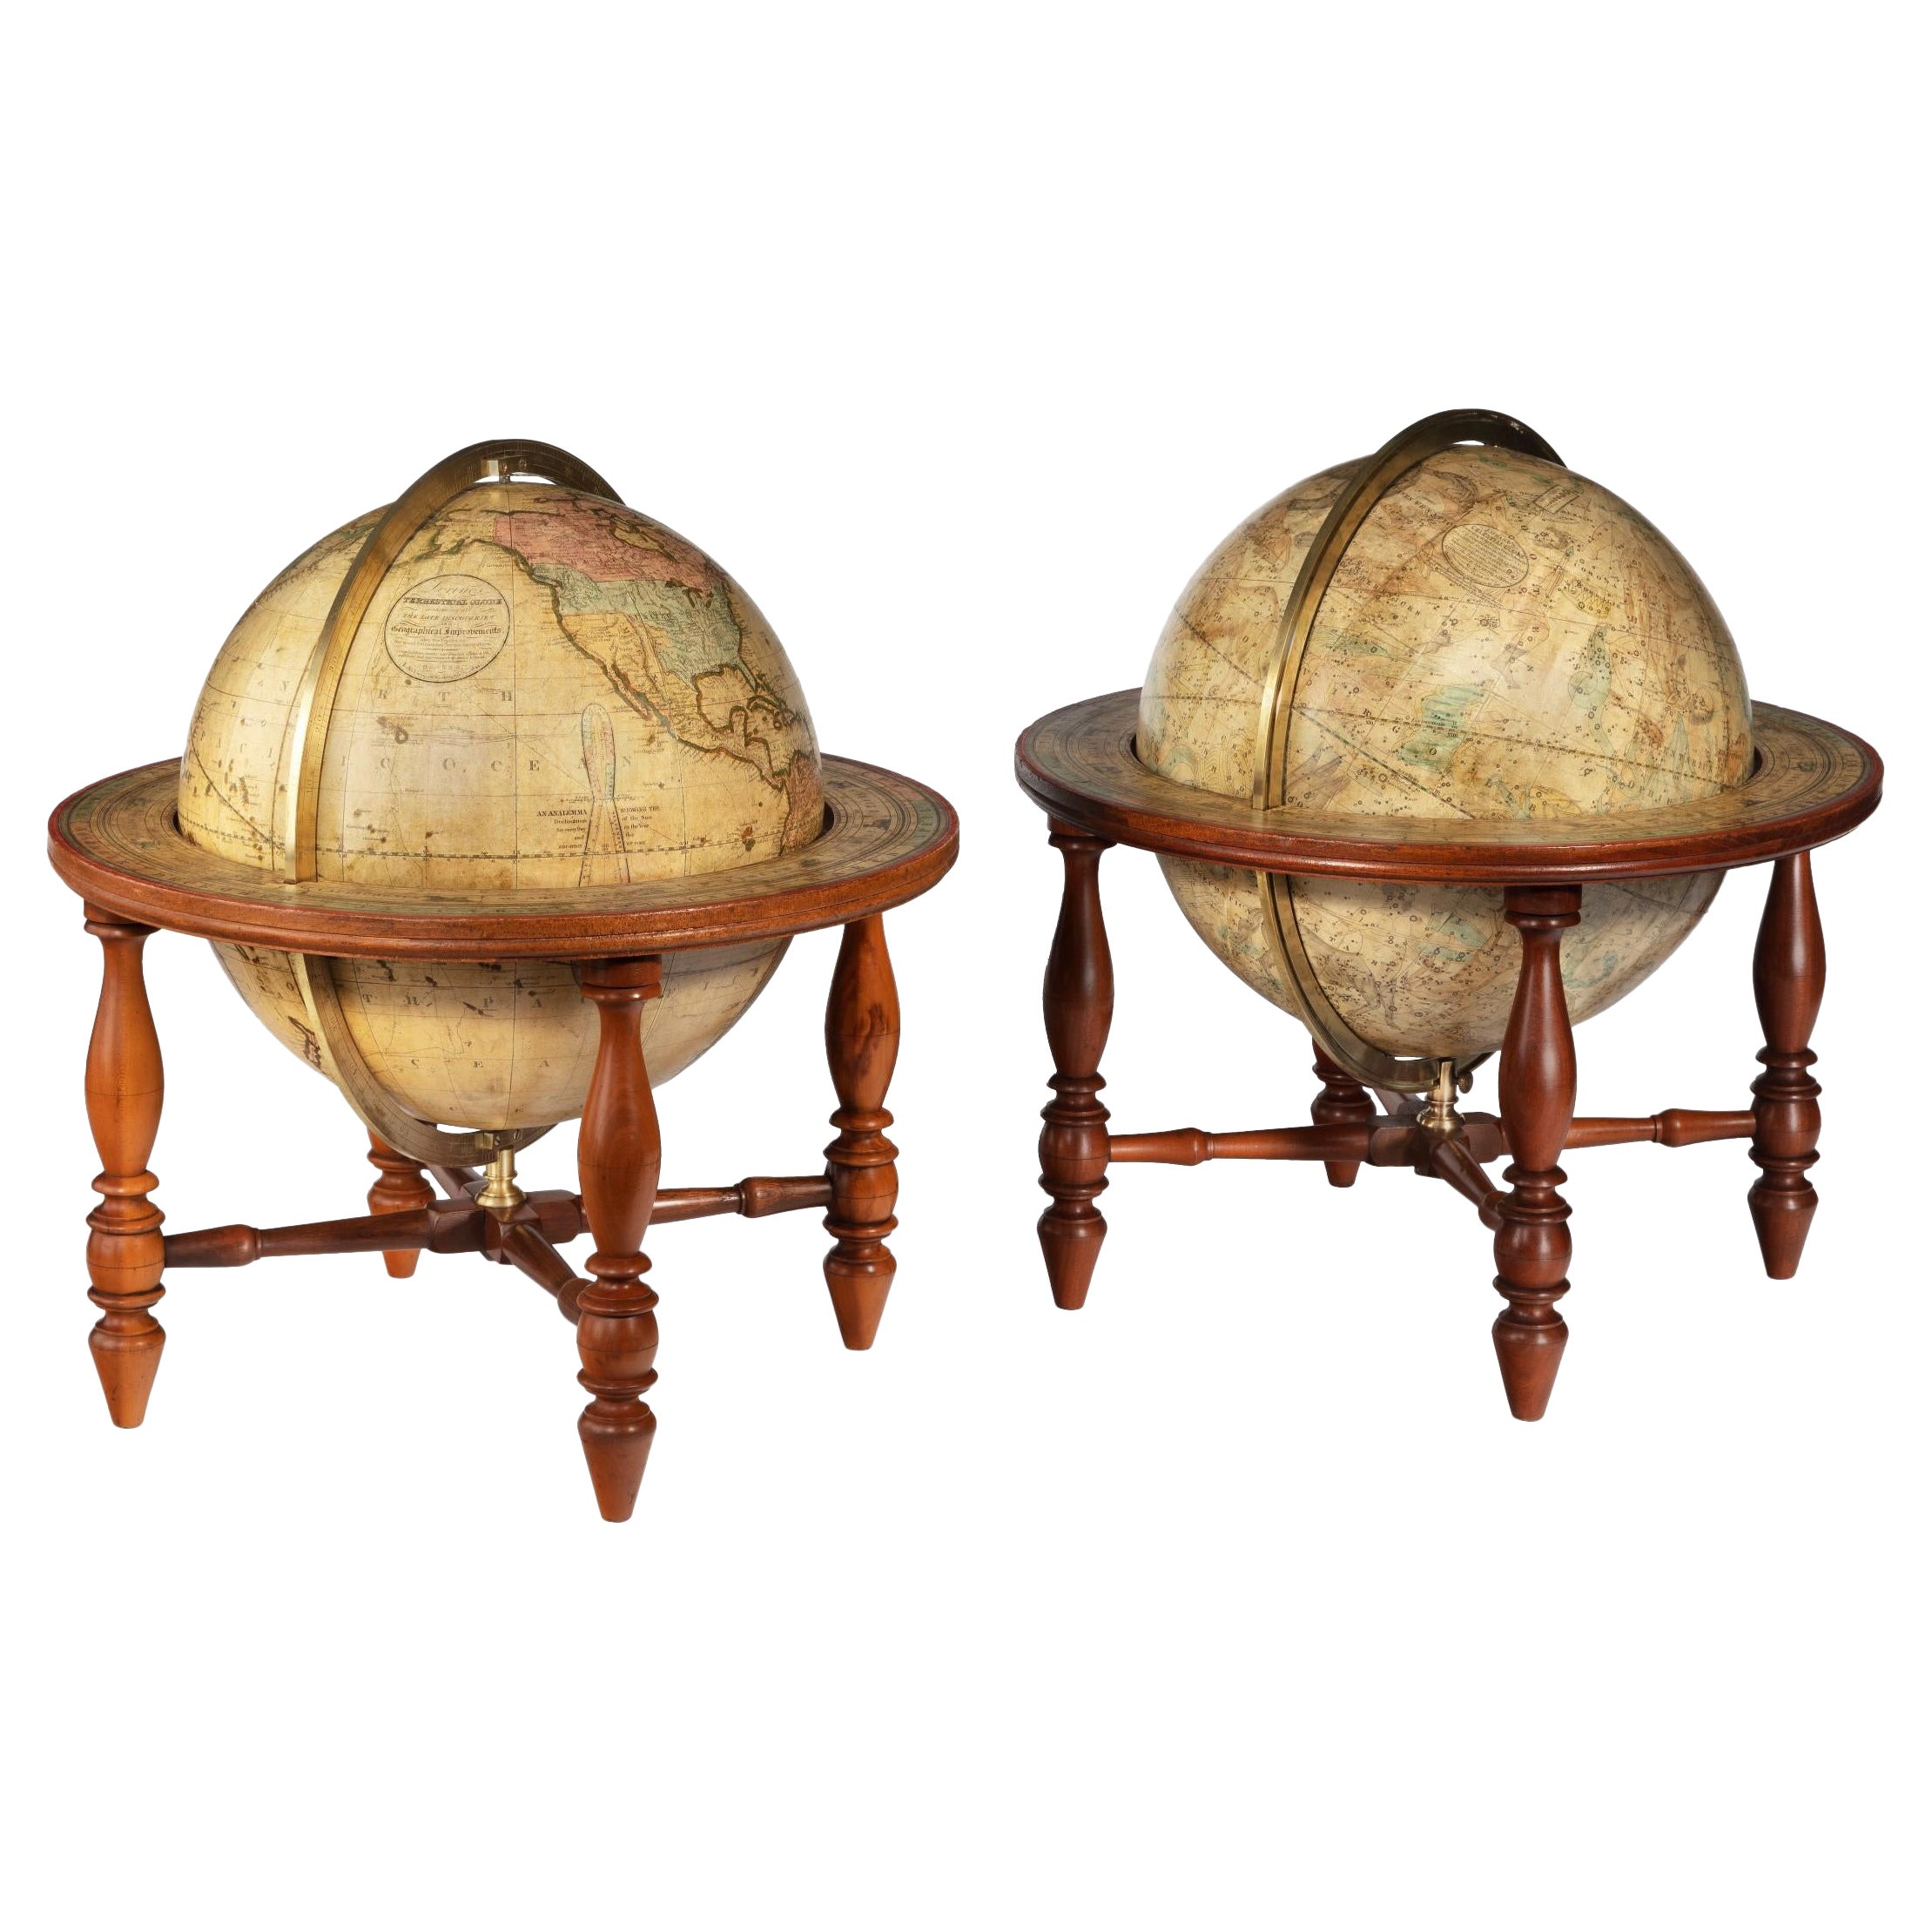 Pair of Table Globes by Josiah Loring, Dated 1844 and 1841 For Sale